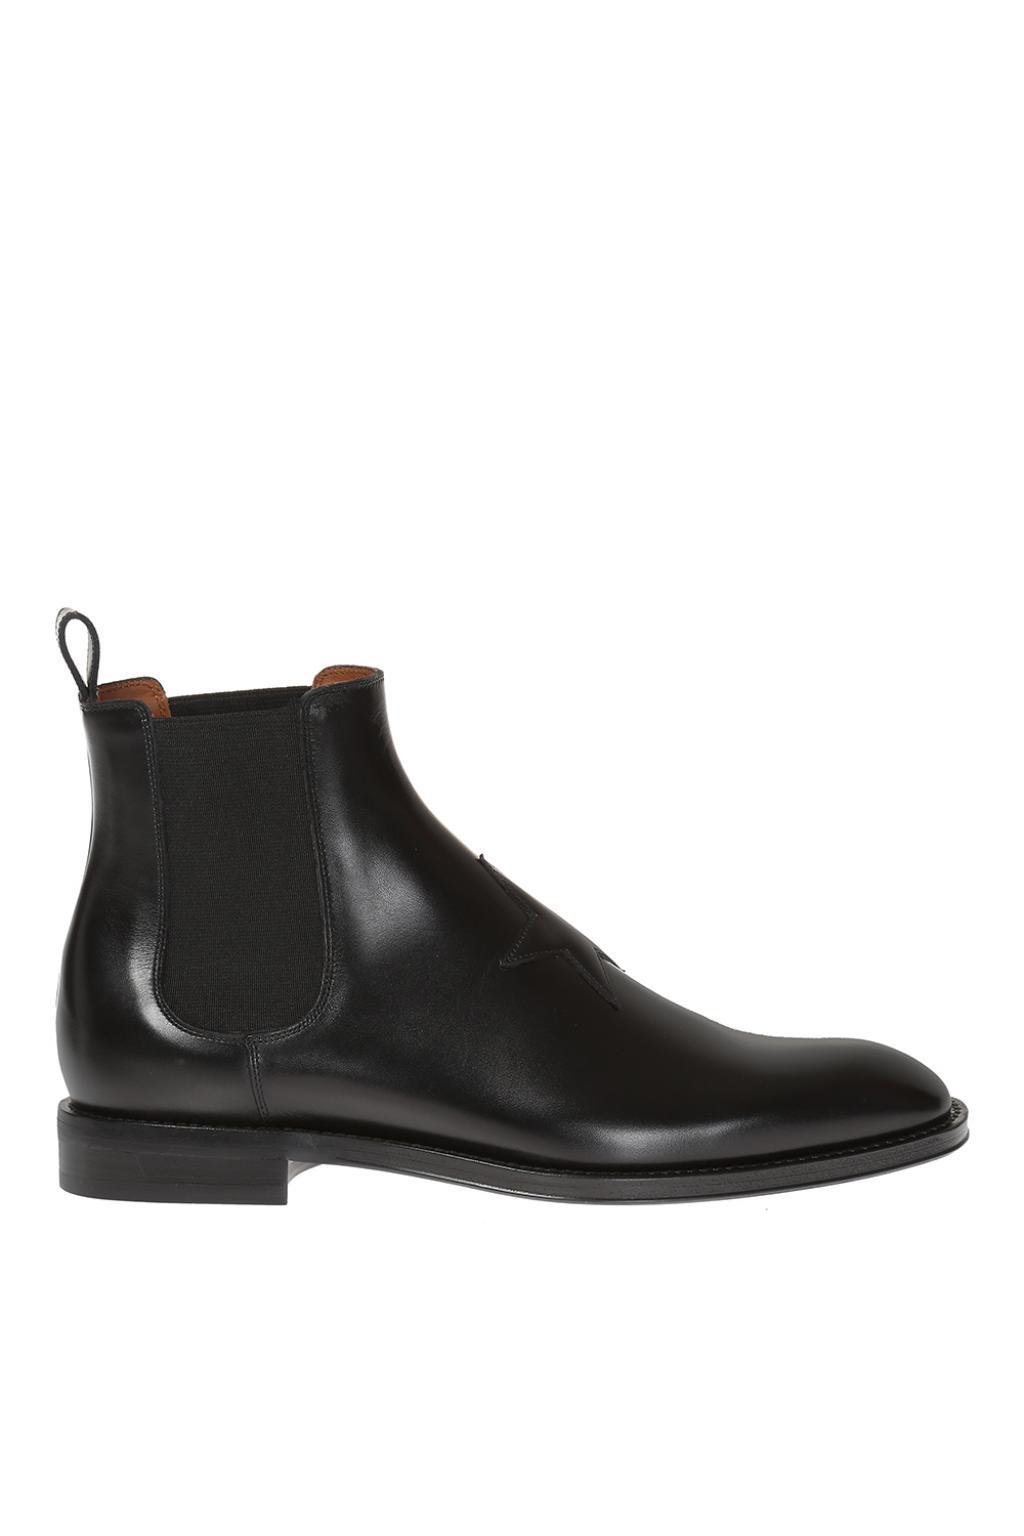 Givenchy Leather Chelsea Boots in Black for Men - Lyst